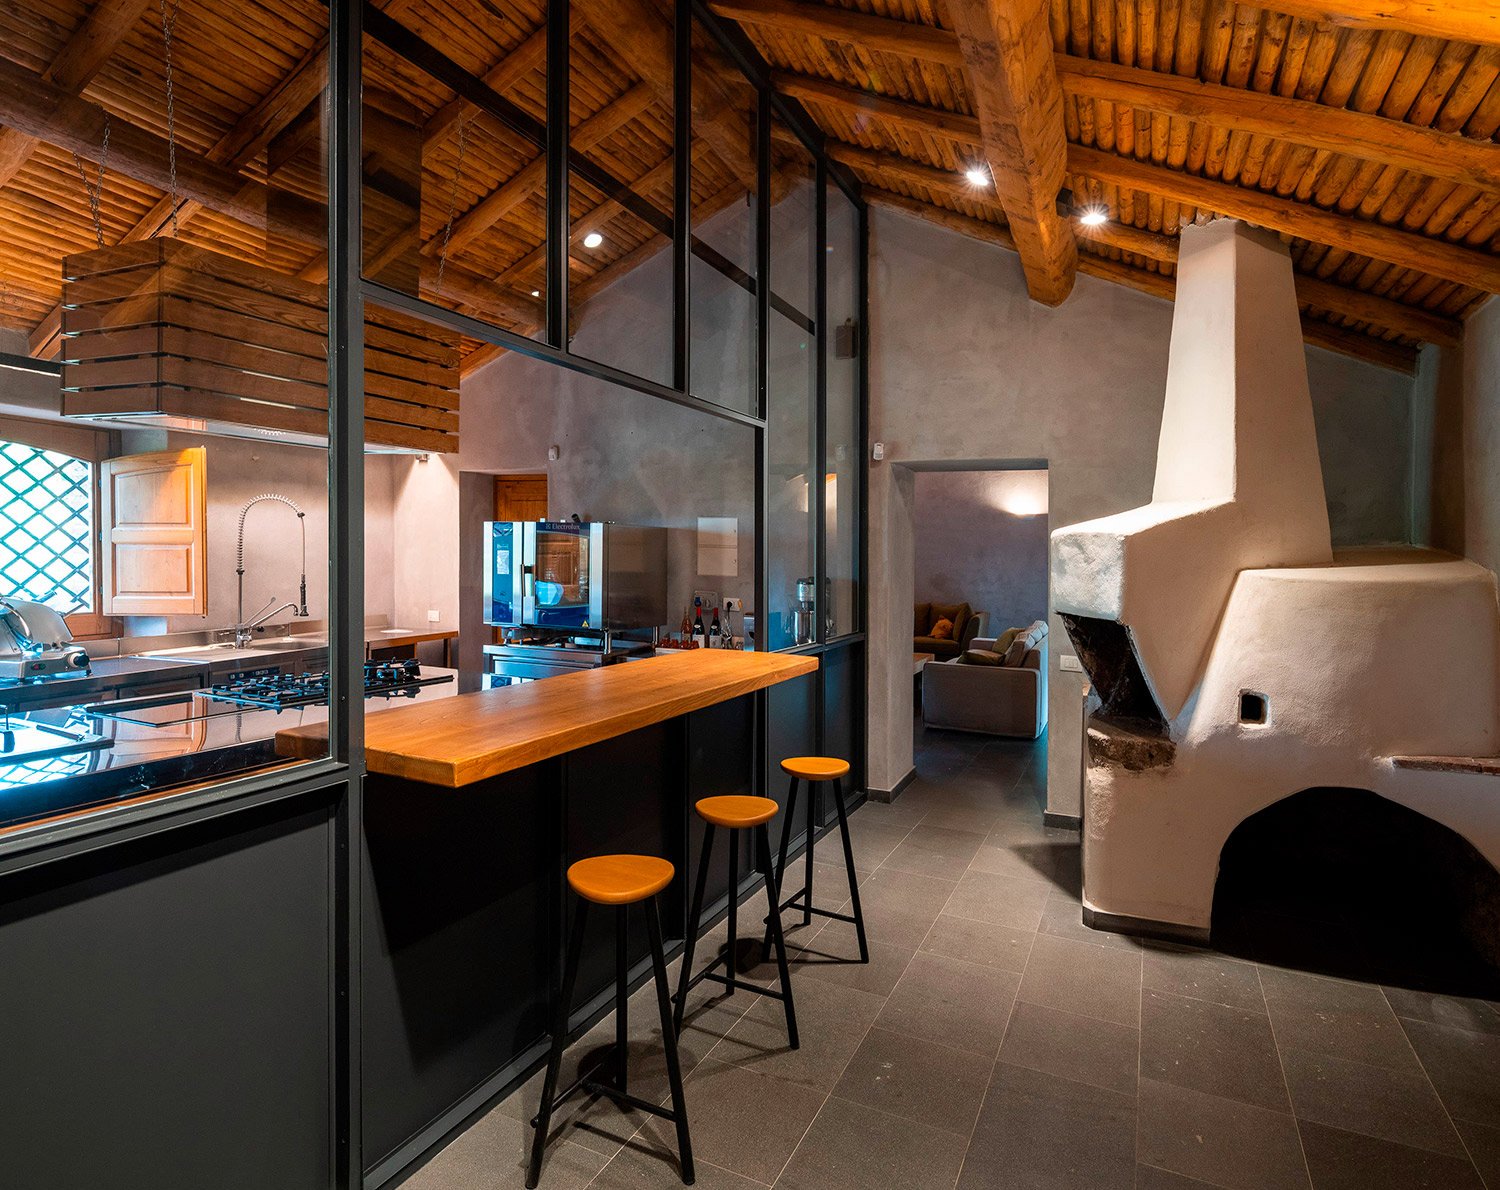 The new kitchen and the ancient oven | Alberto Moncada, MAB arquitectura